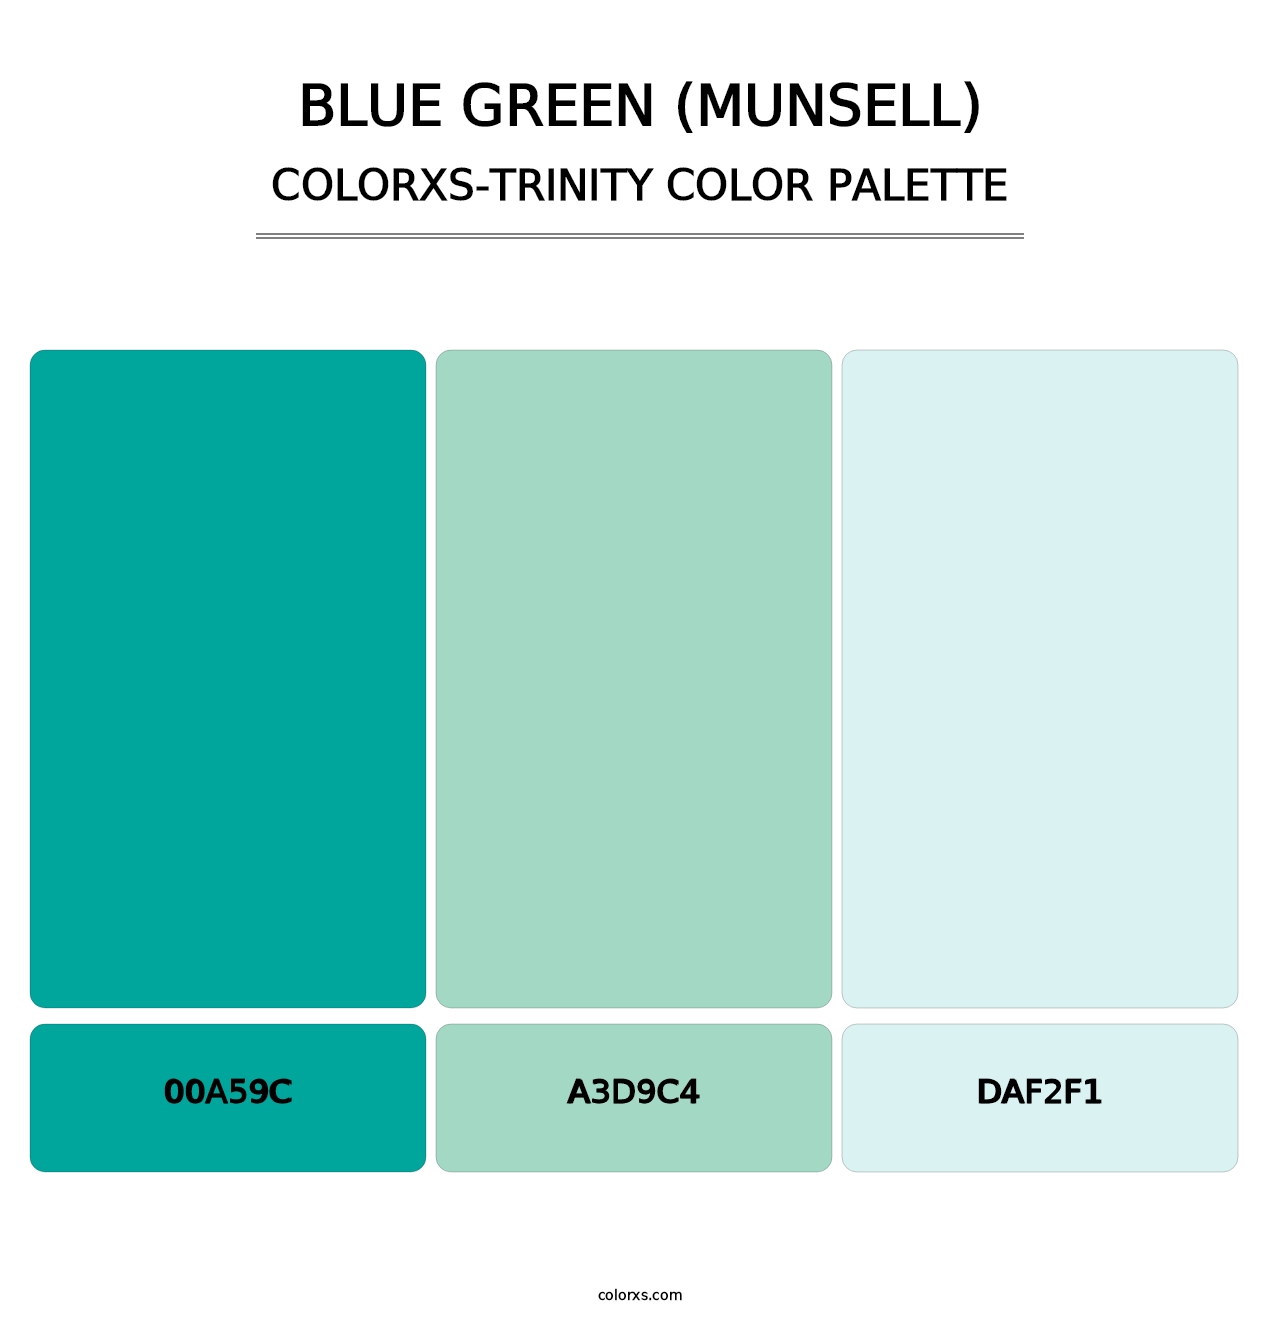 Blue Green (Munsell) - Colorxs Trinity Palette